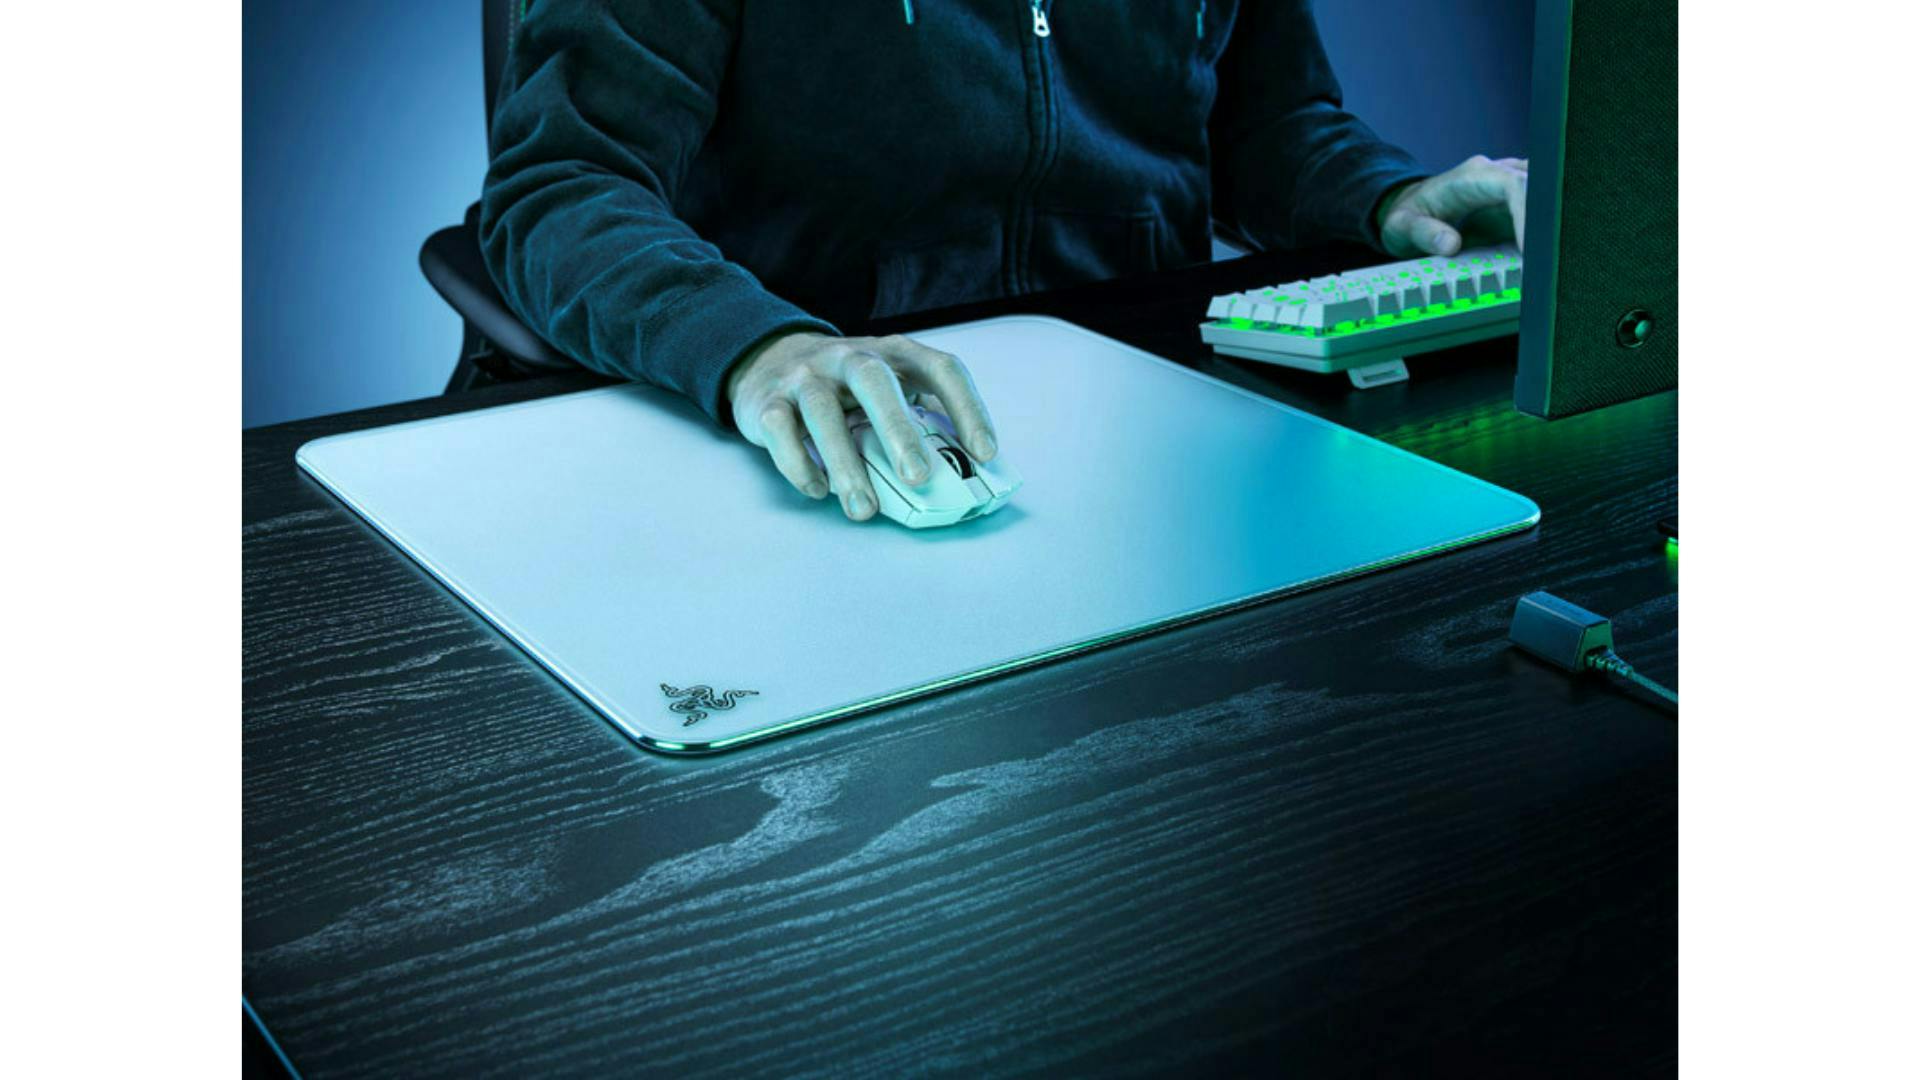 Someone is sitting at a desk using a white glass gaming mouse pad. | Credit: CaseKing.